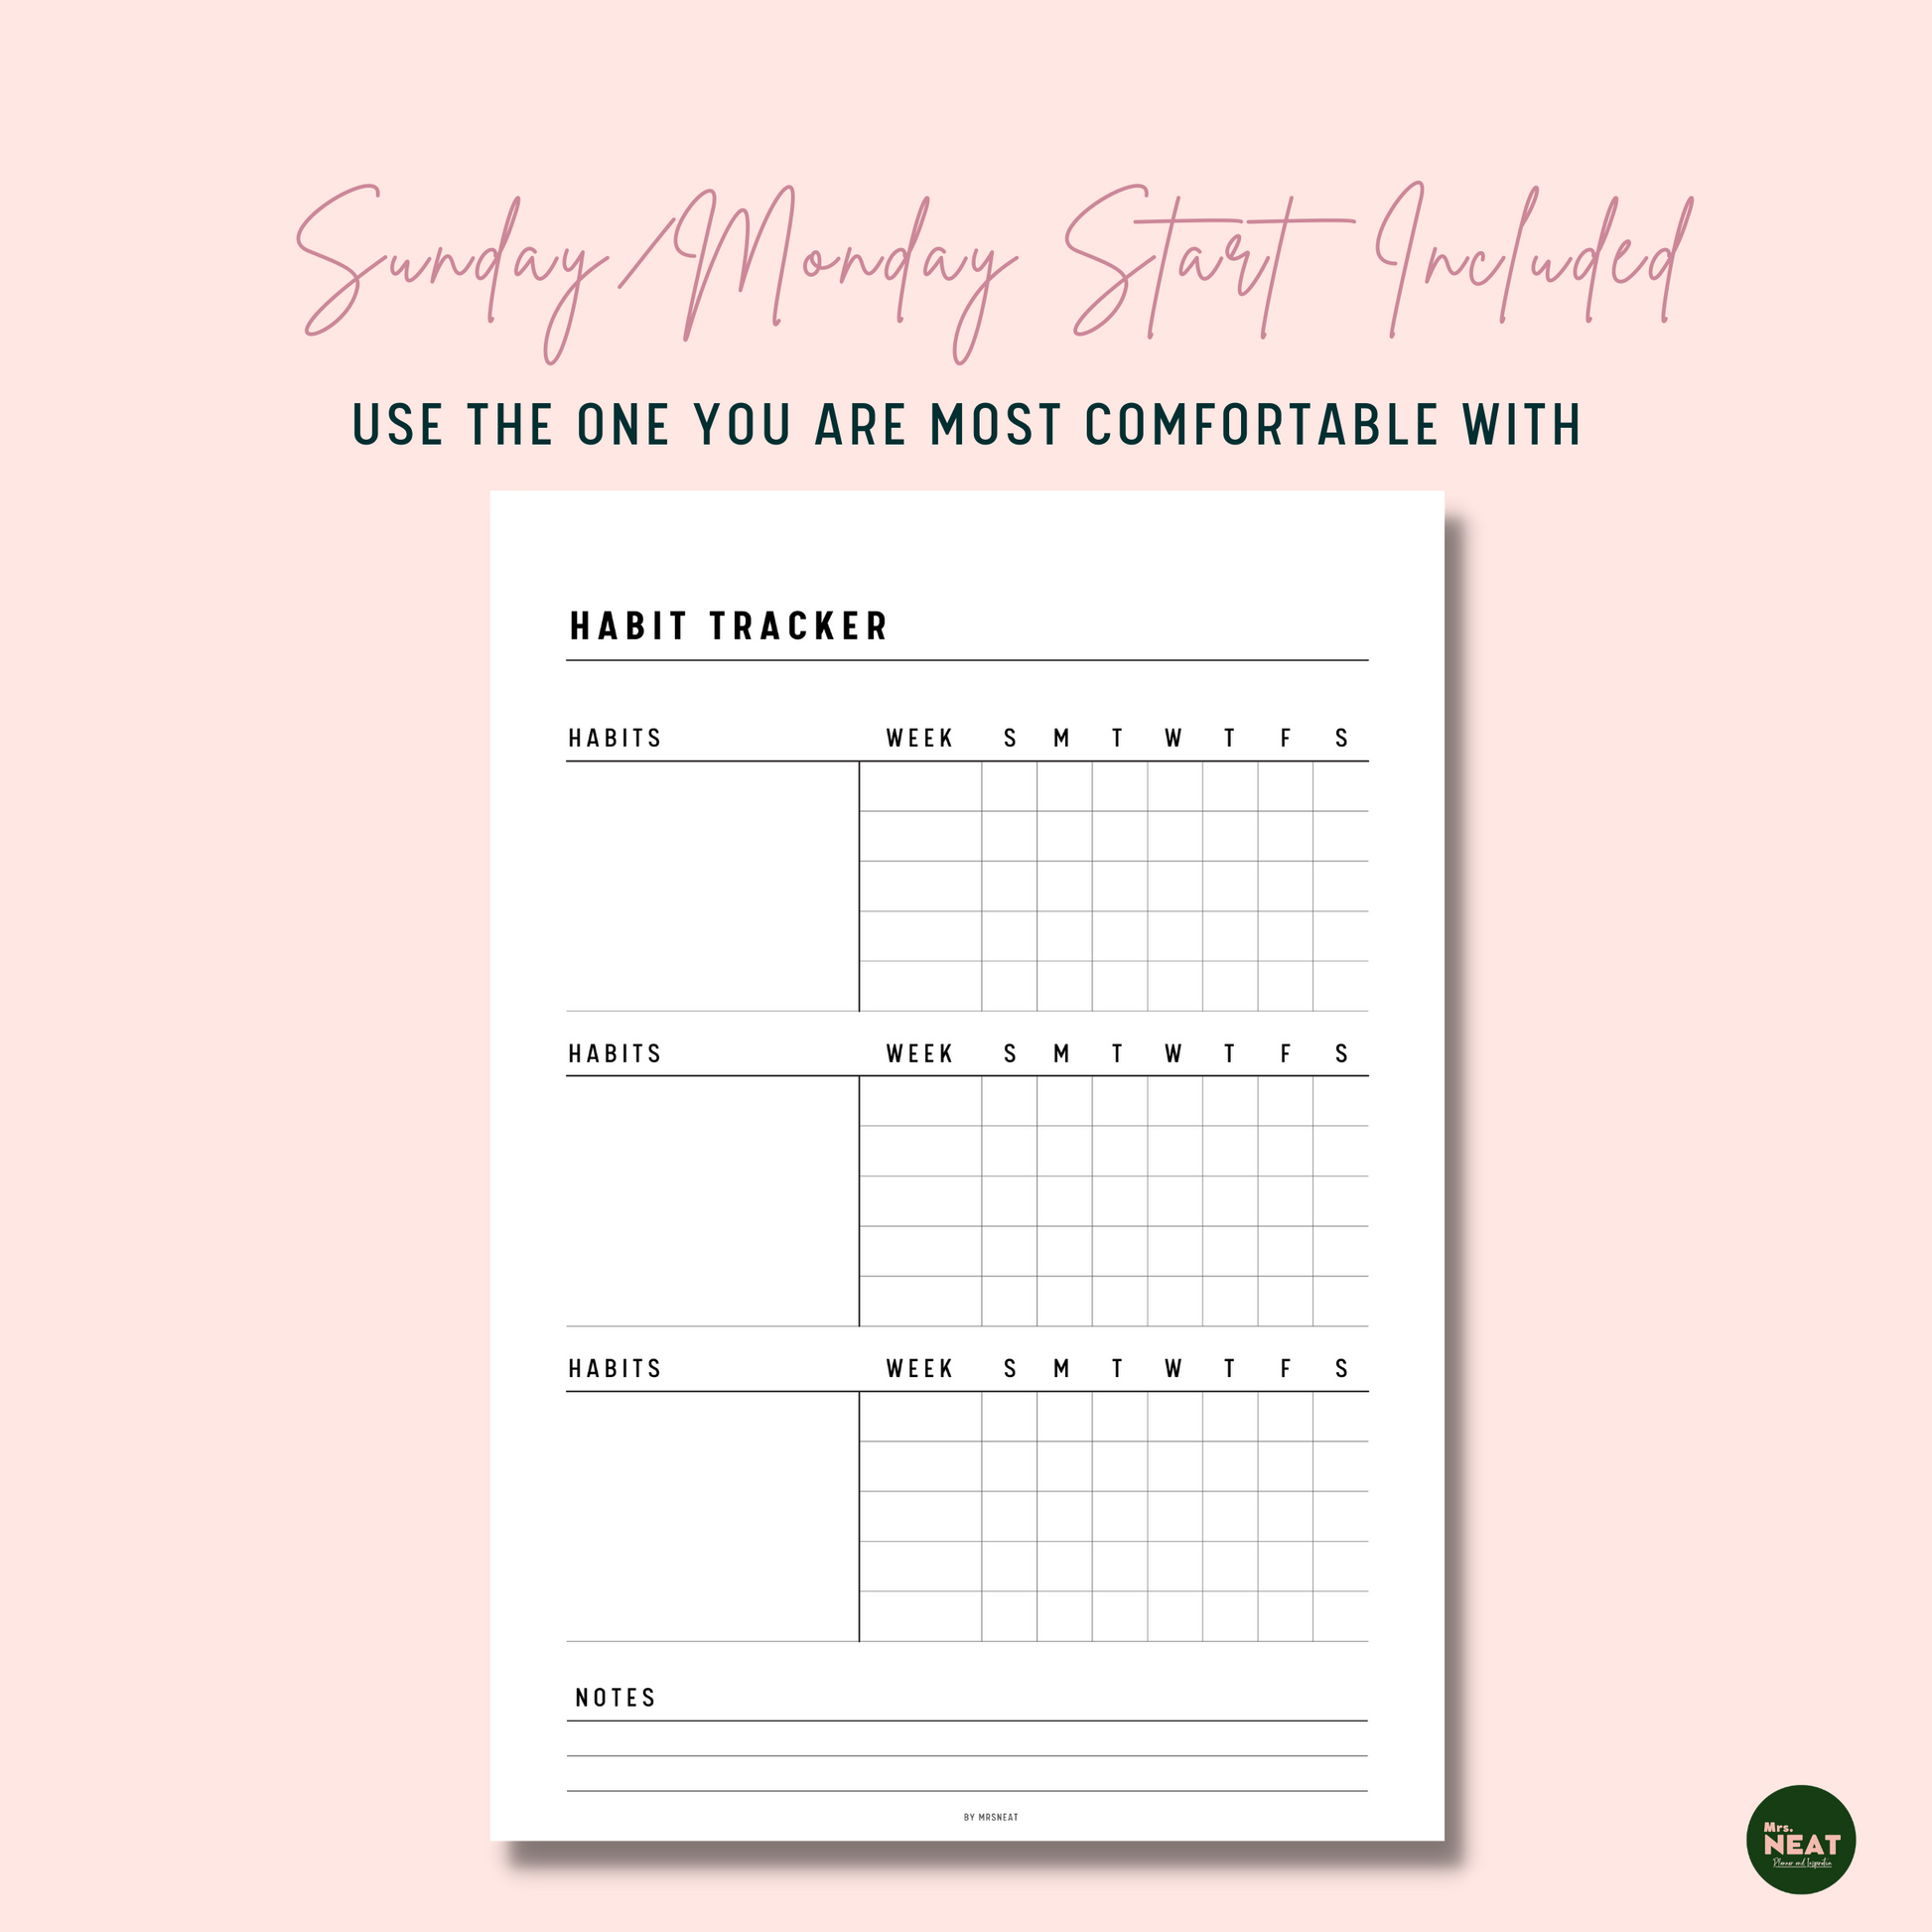 Minimalist and Cute Daily Habit Tracker Planner with Sunday start and Monday start included